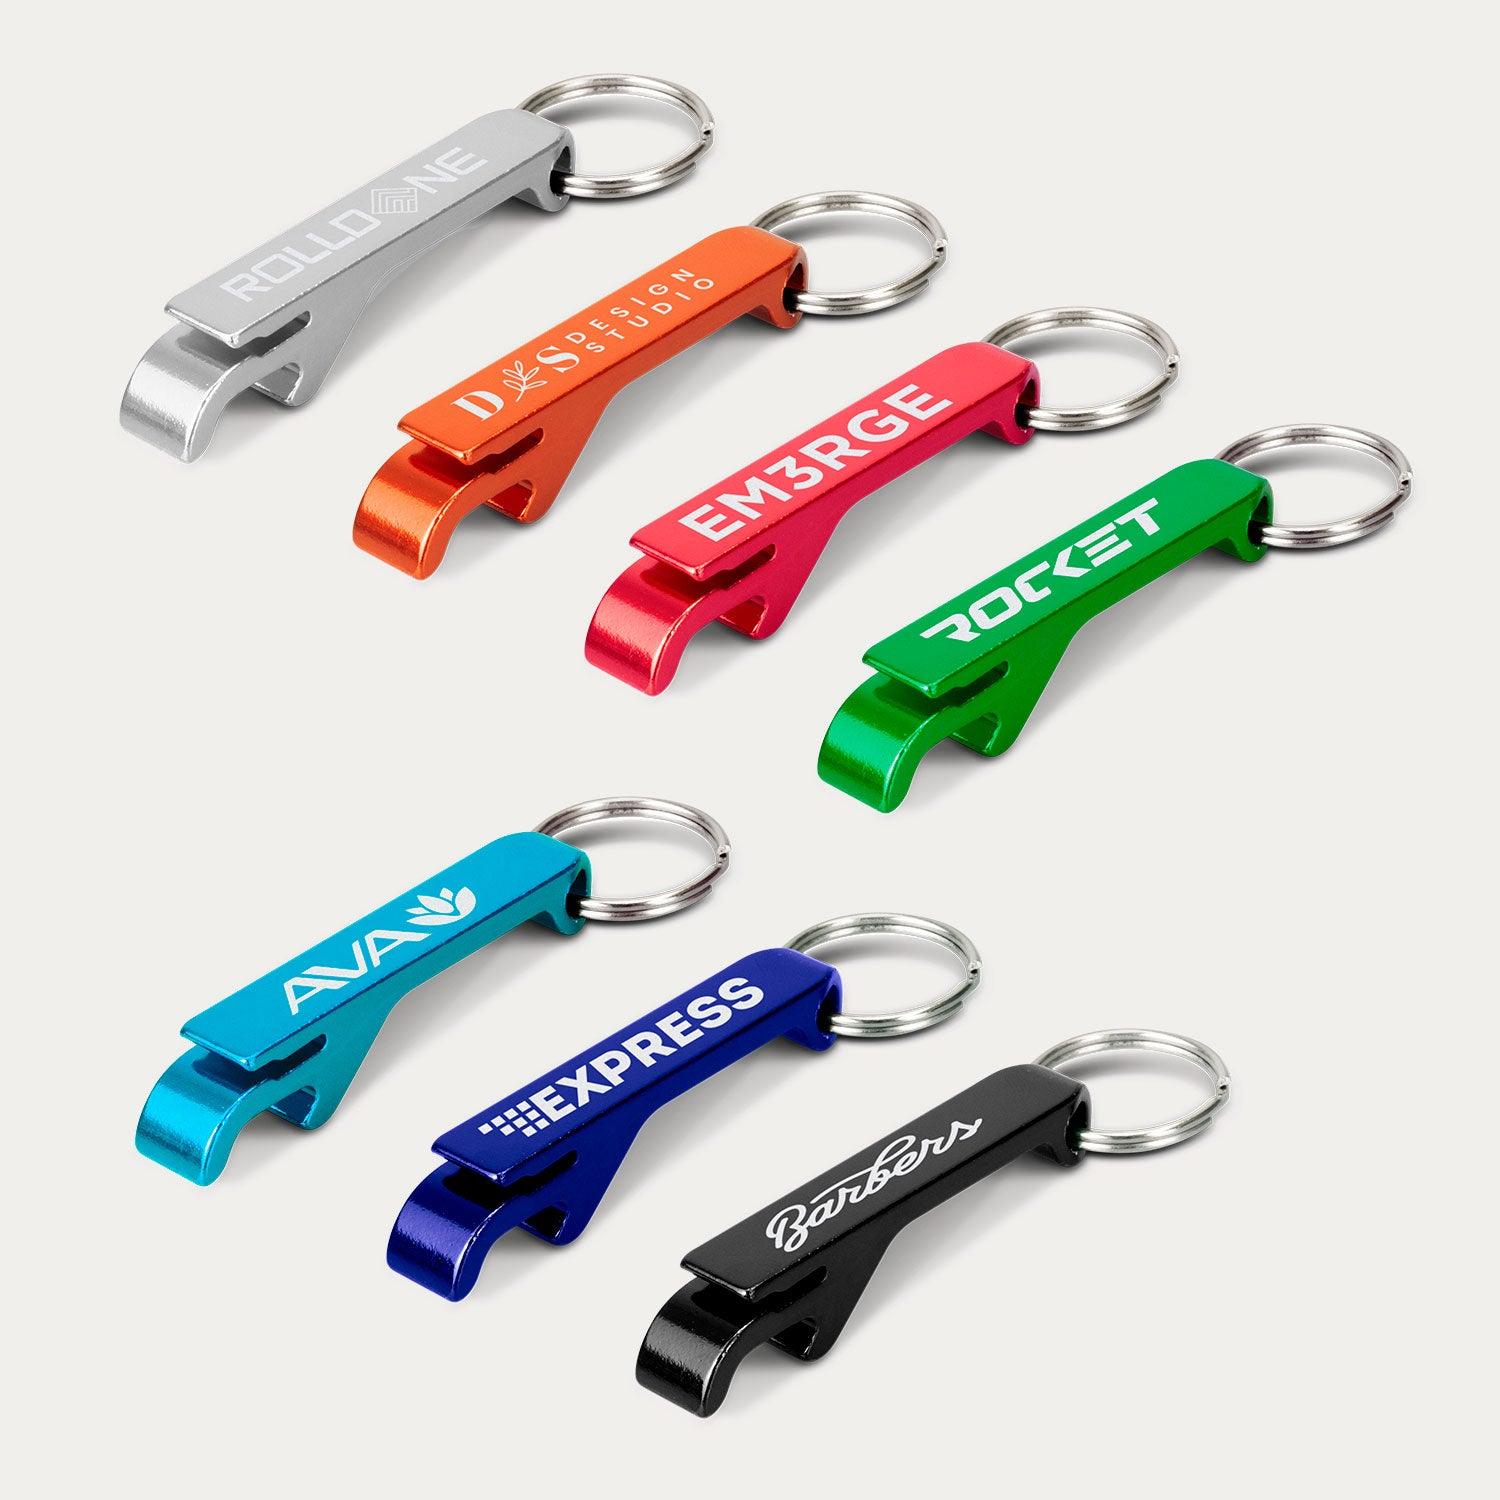 Metal Bottle Opener Key Ring (HYO) - Persopens Promotional Products LTD